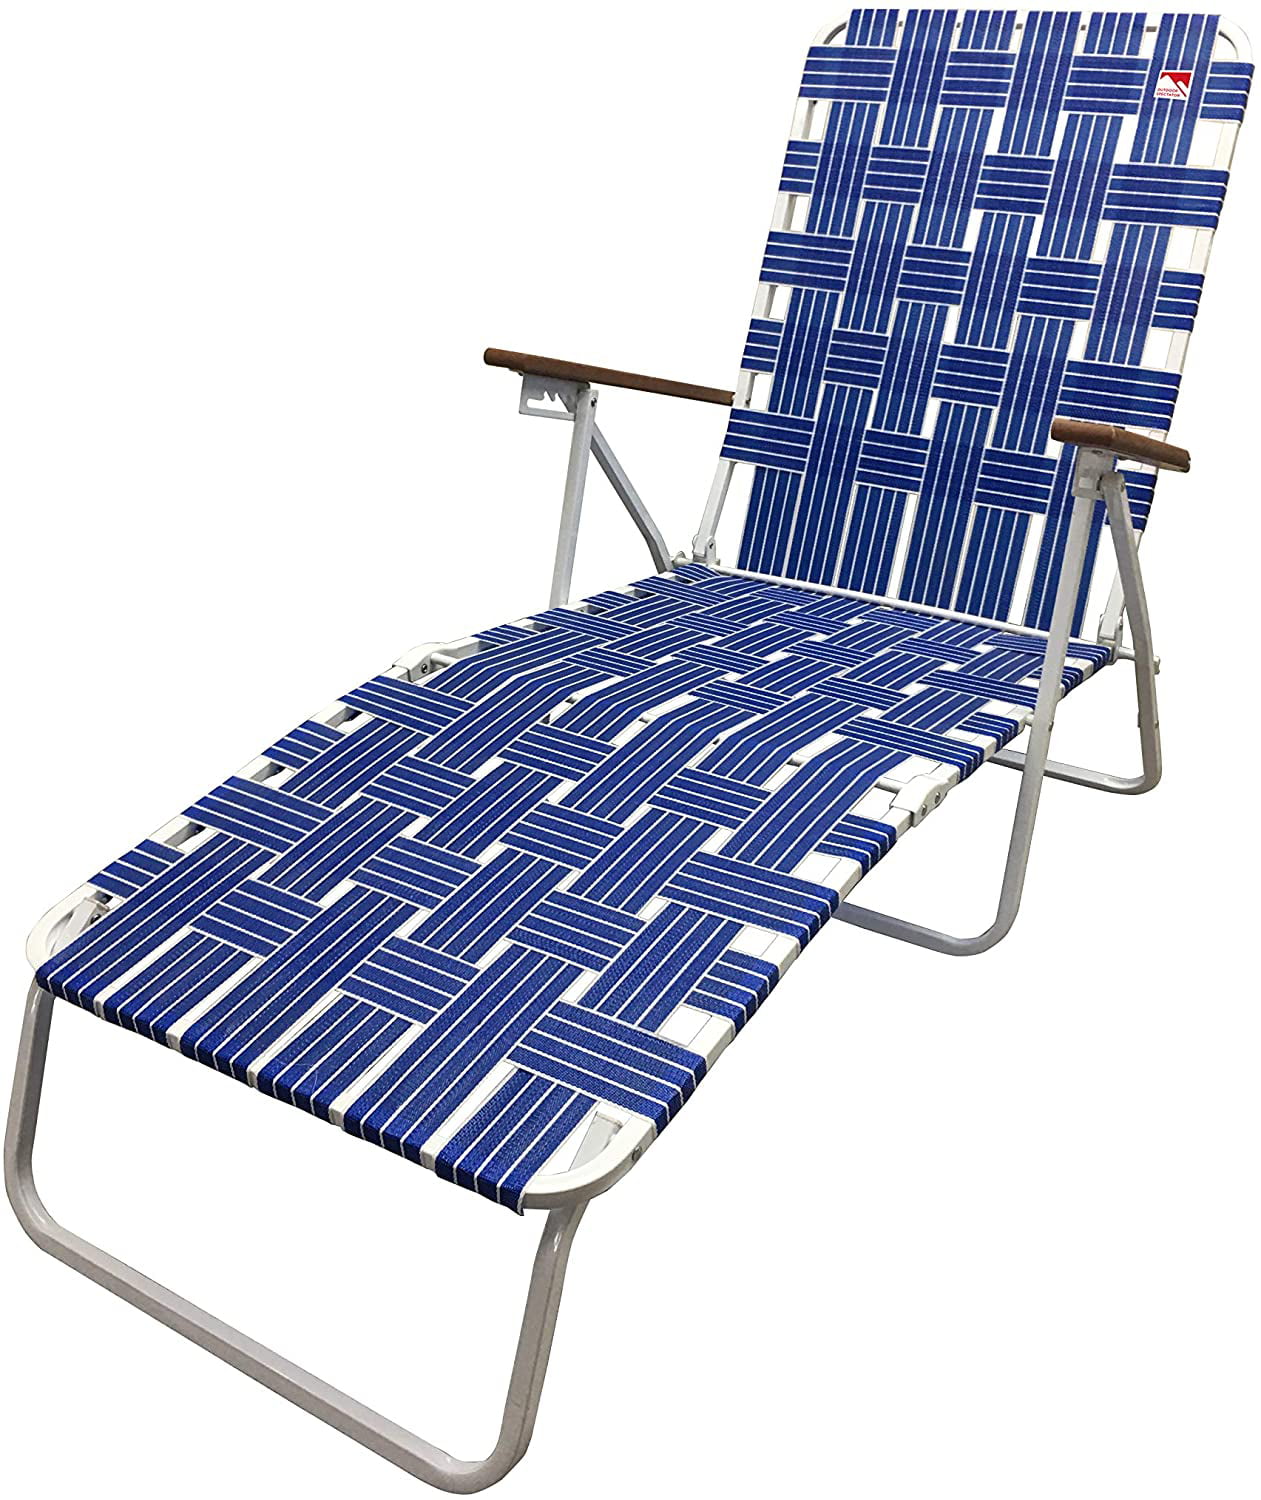  Folding Lawn Chairs Walmart for Simple Design